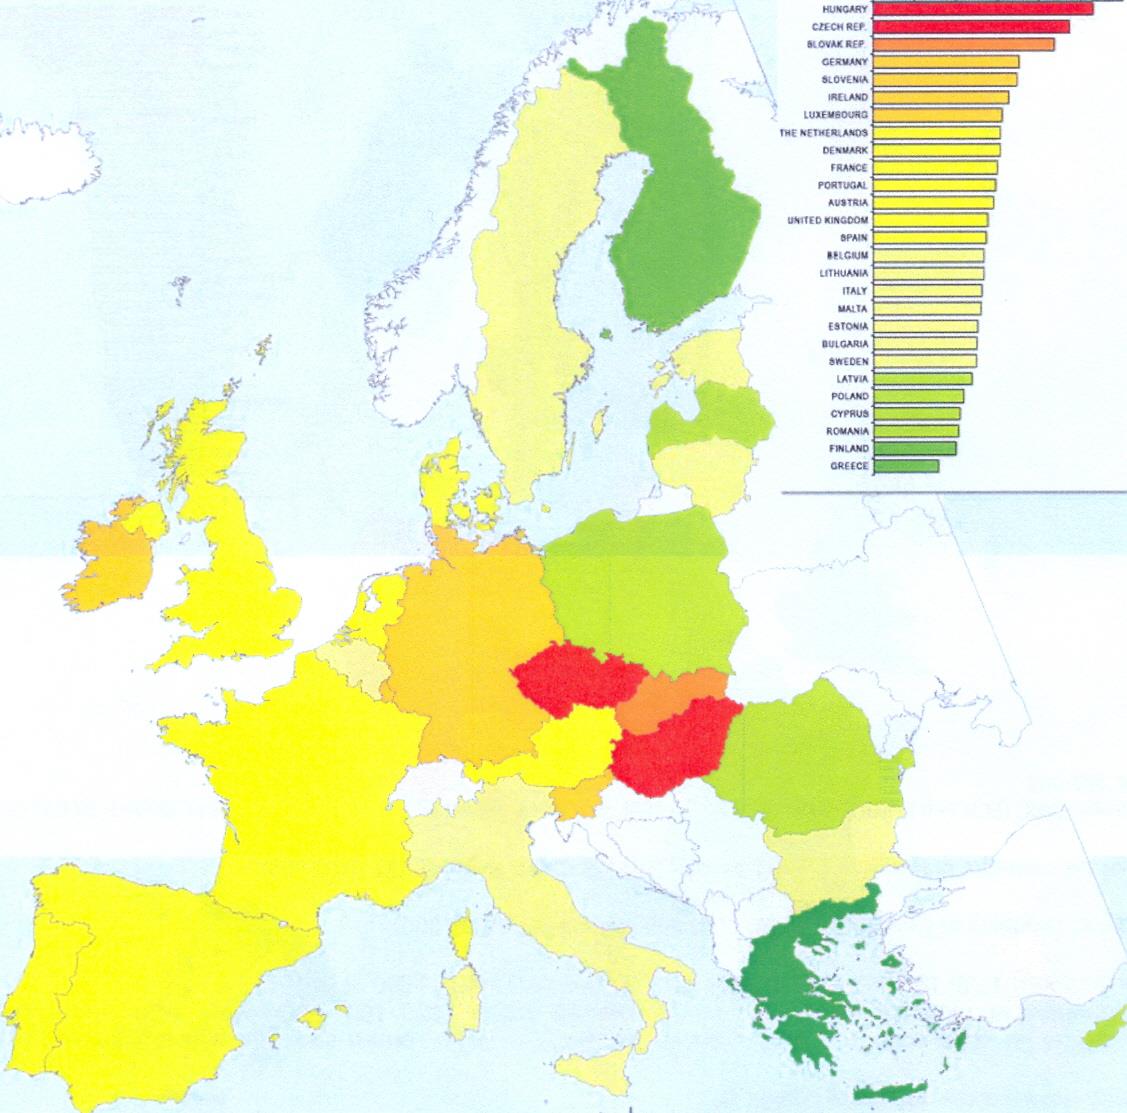 Colorectal cancer incidence in men in the EU Member